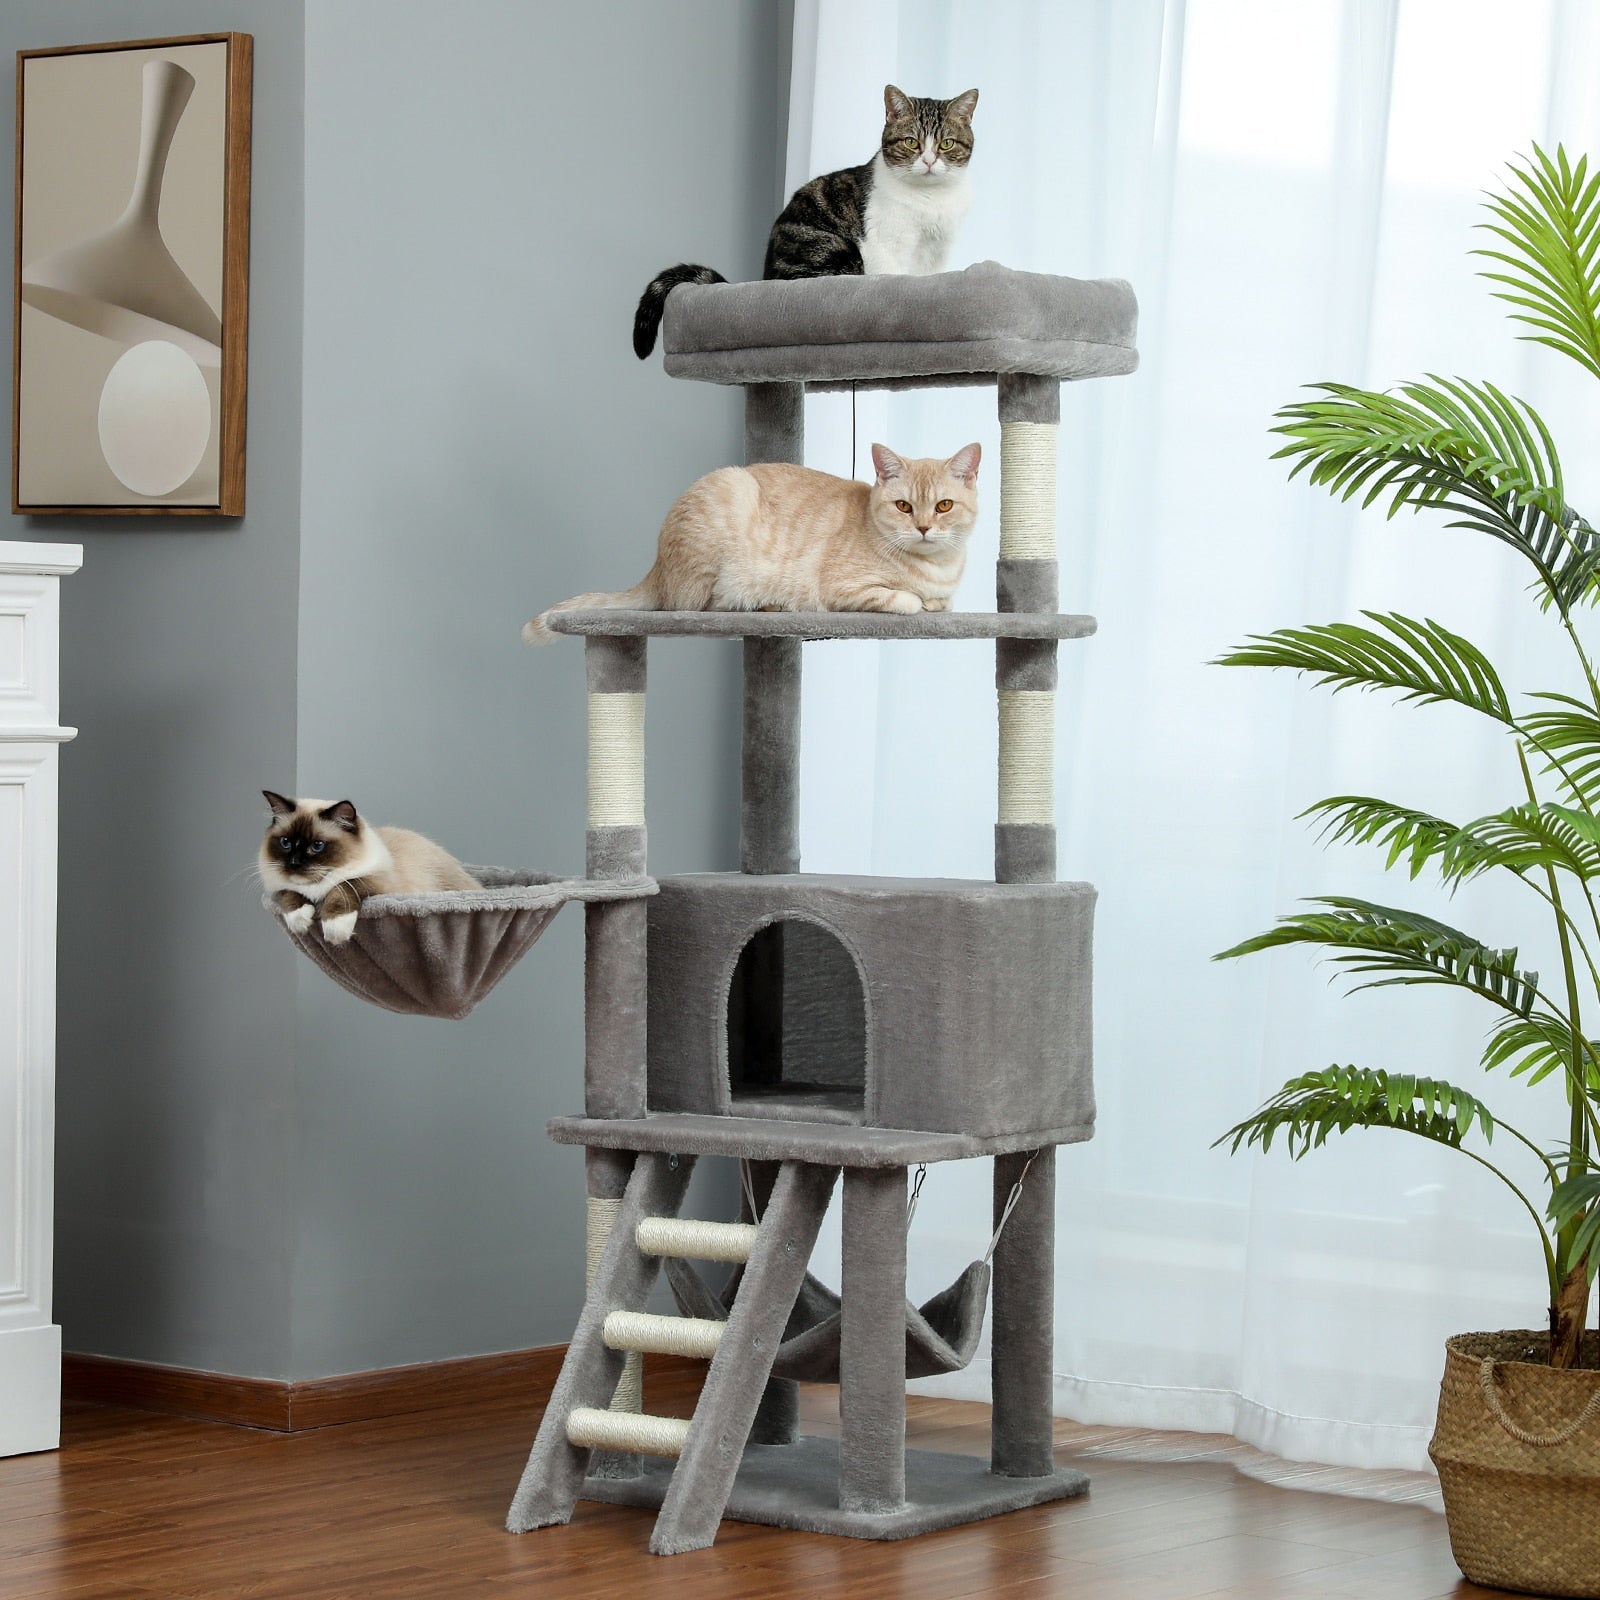 Large Cat Scratching Post - Cat scratching post